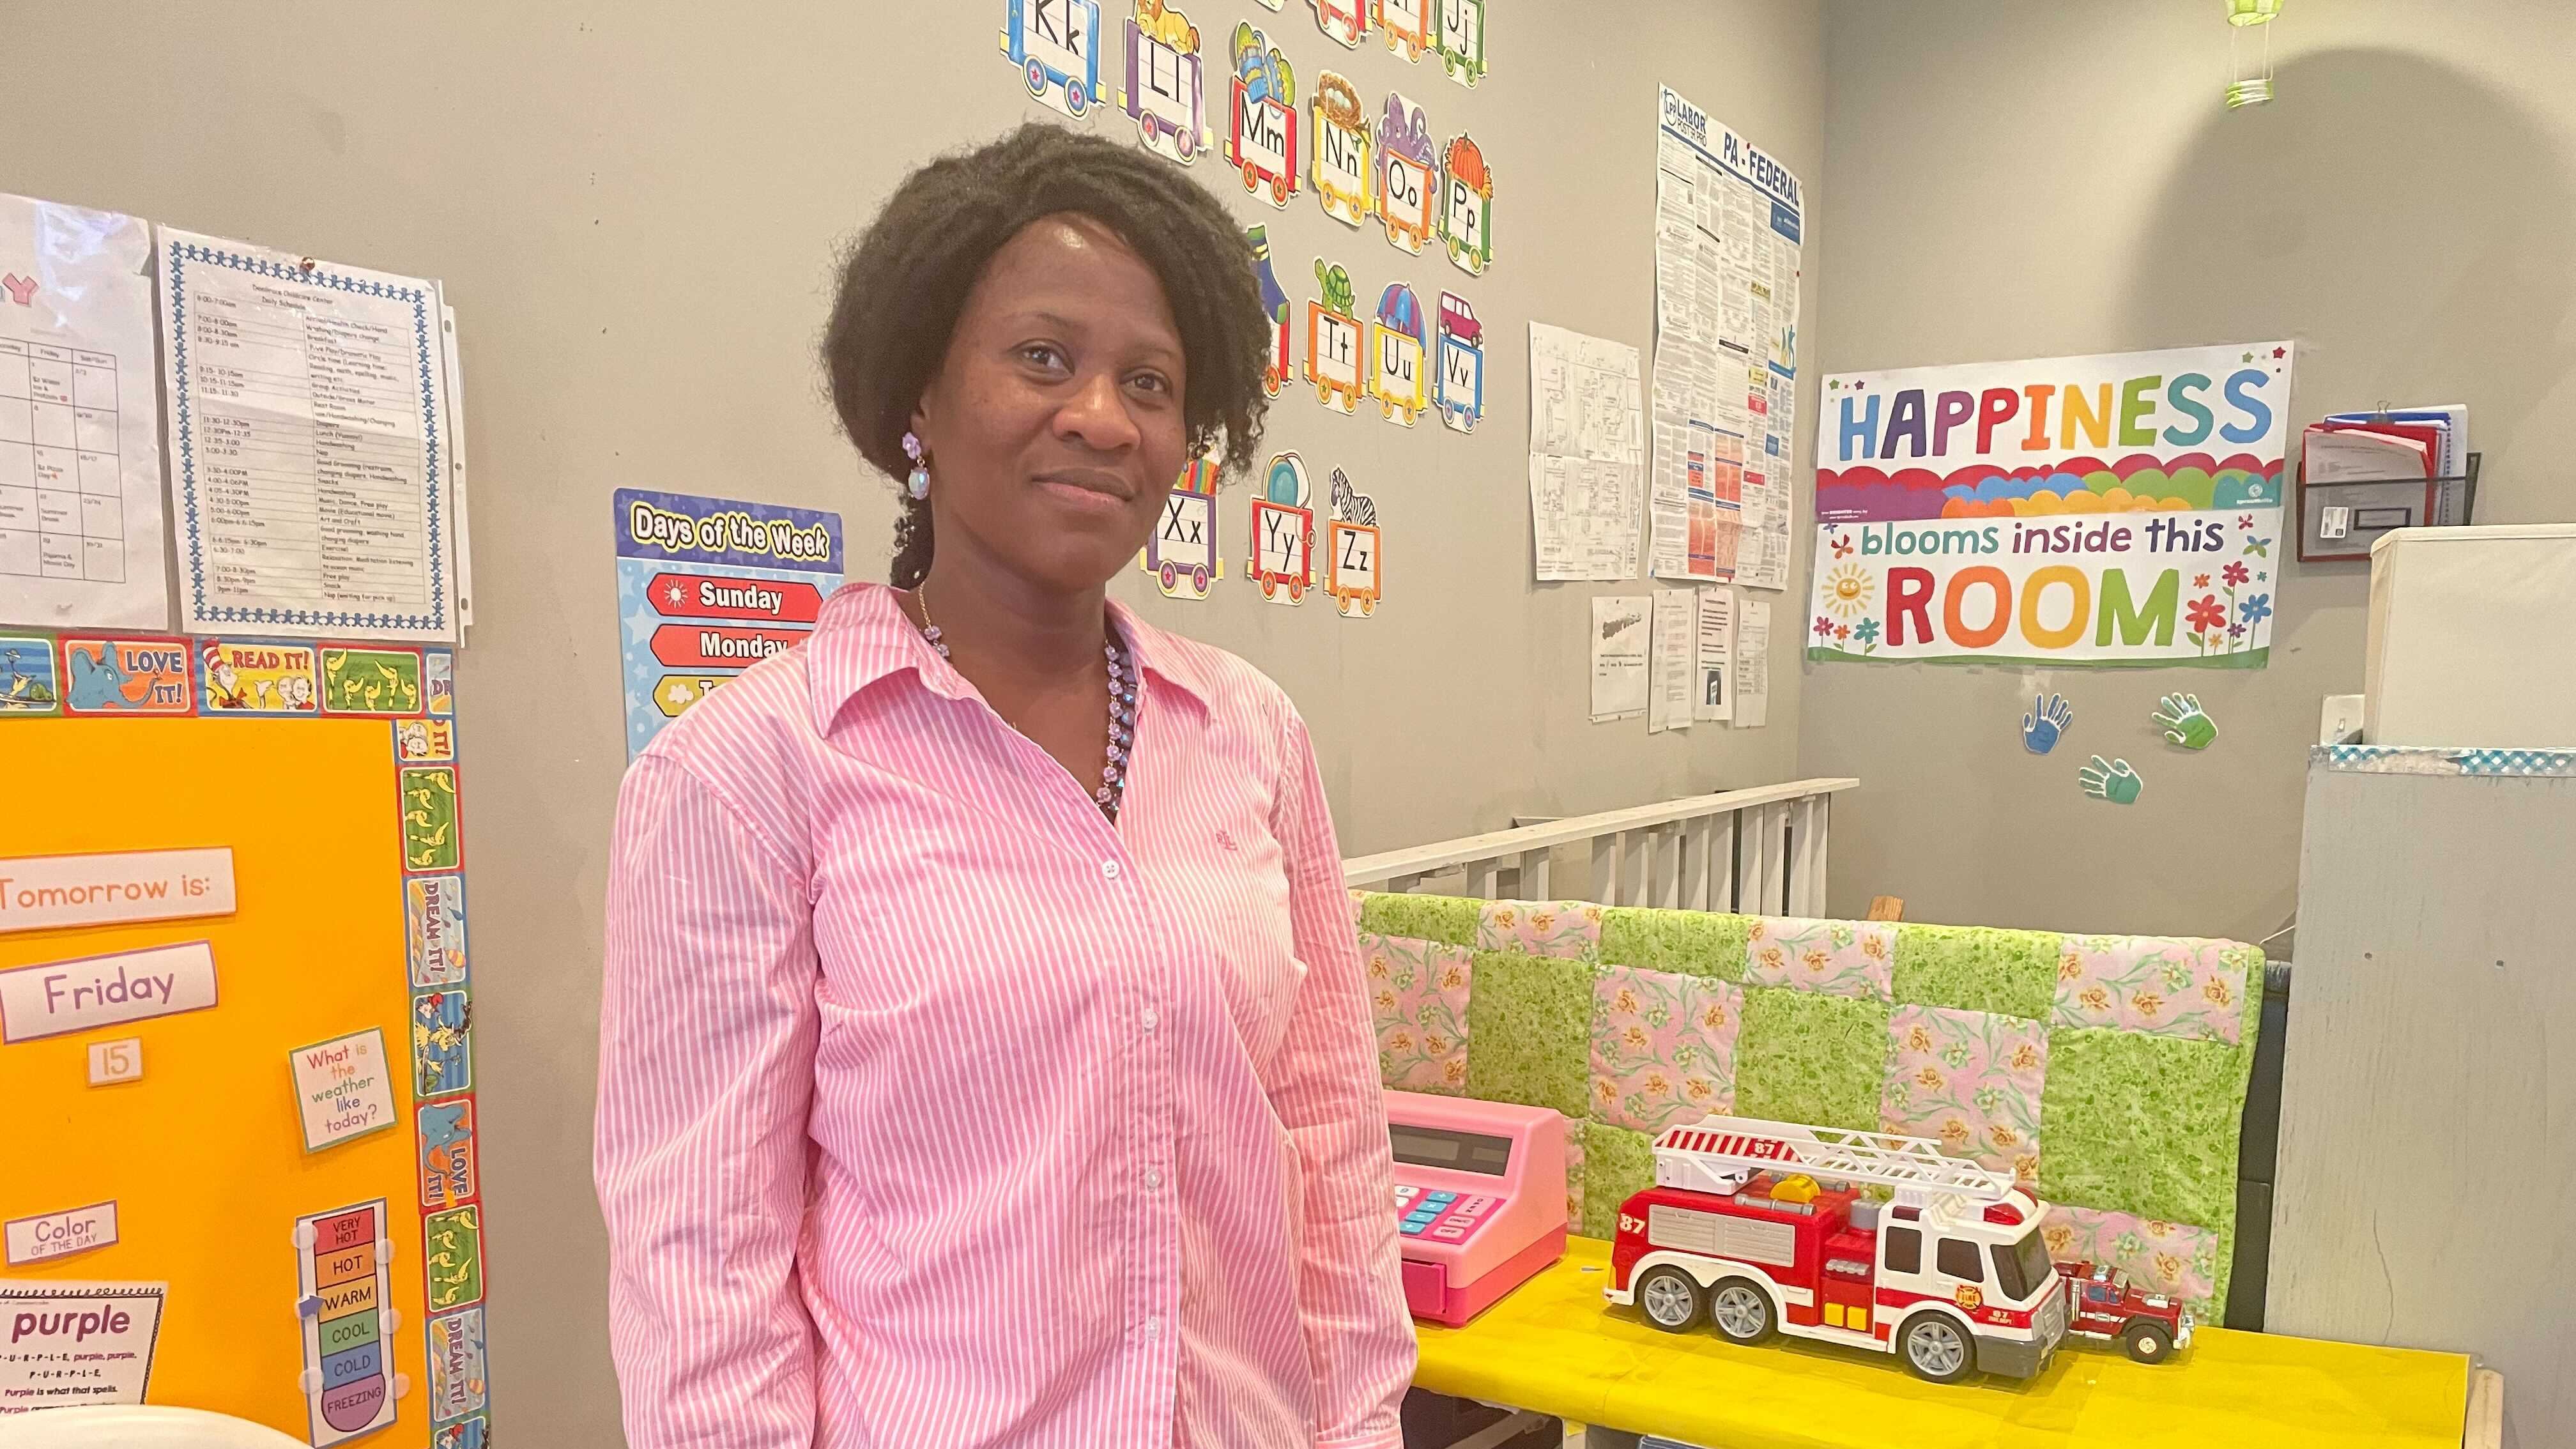 A woman in a pink shirt stands in a child care classroom.